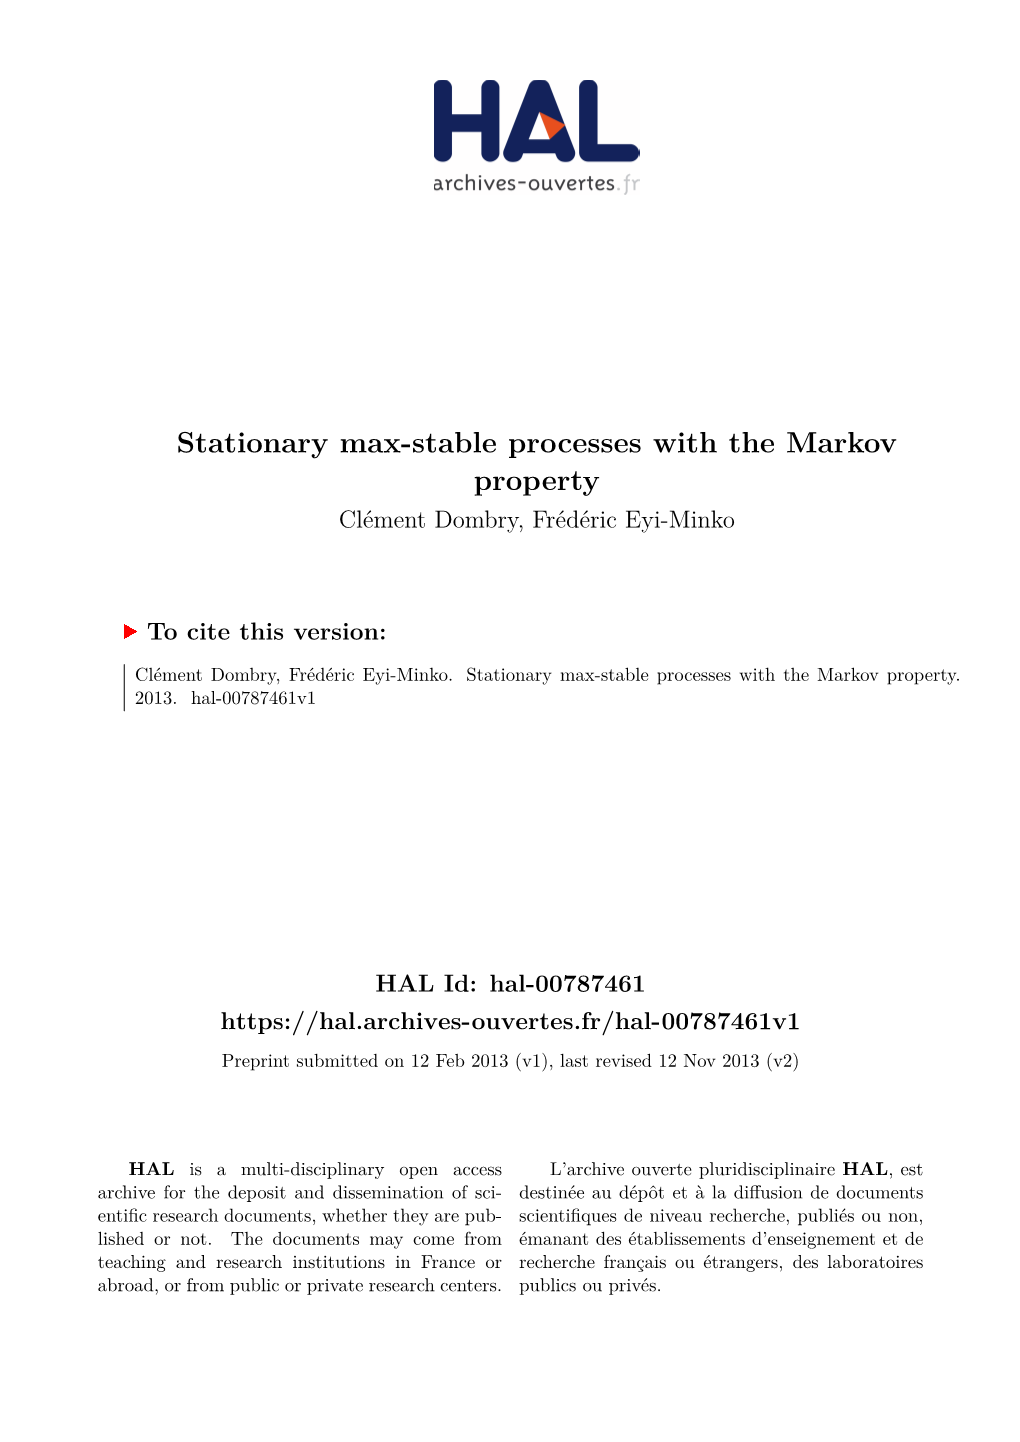 Stationary Max-Stable Processes with the Markov Property Clément Dombry, Frédéric Eyi-Minko